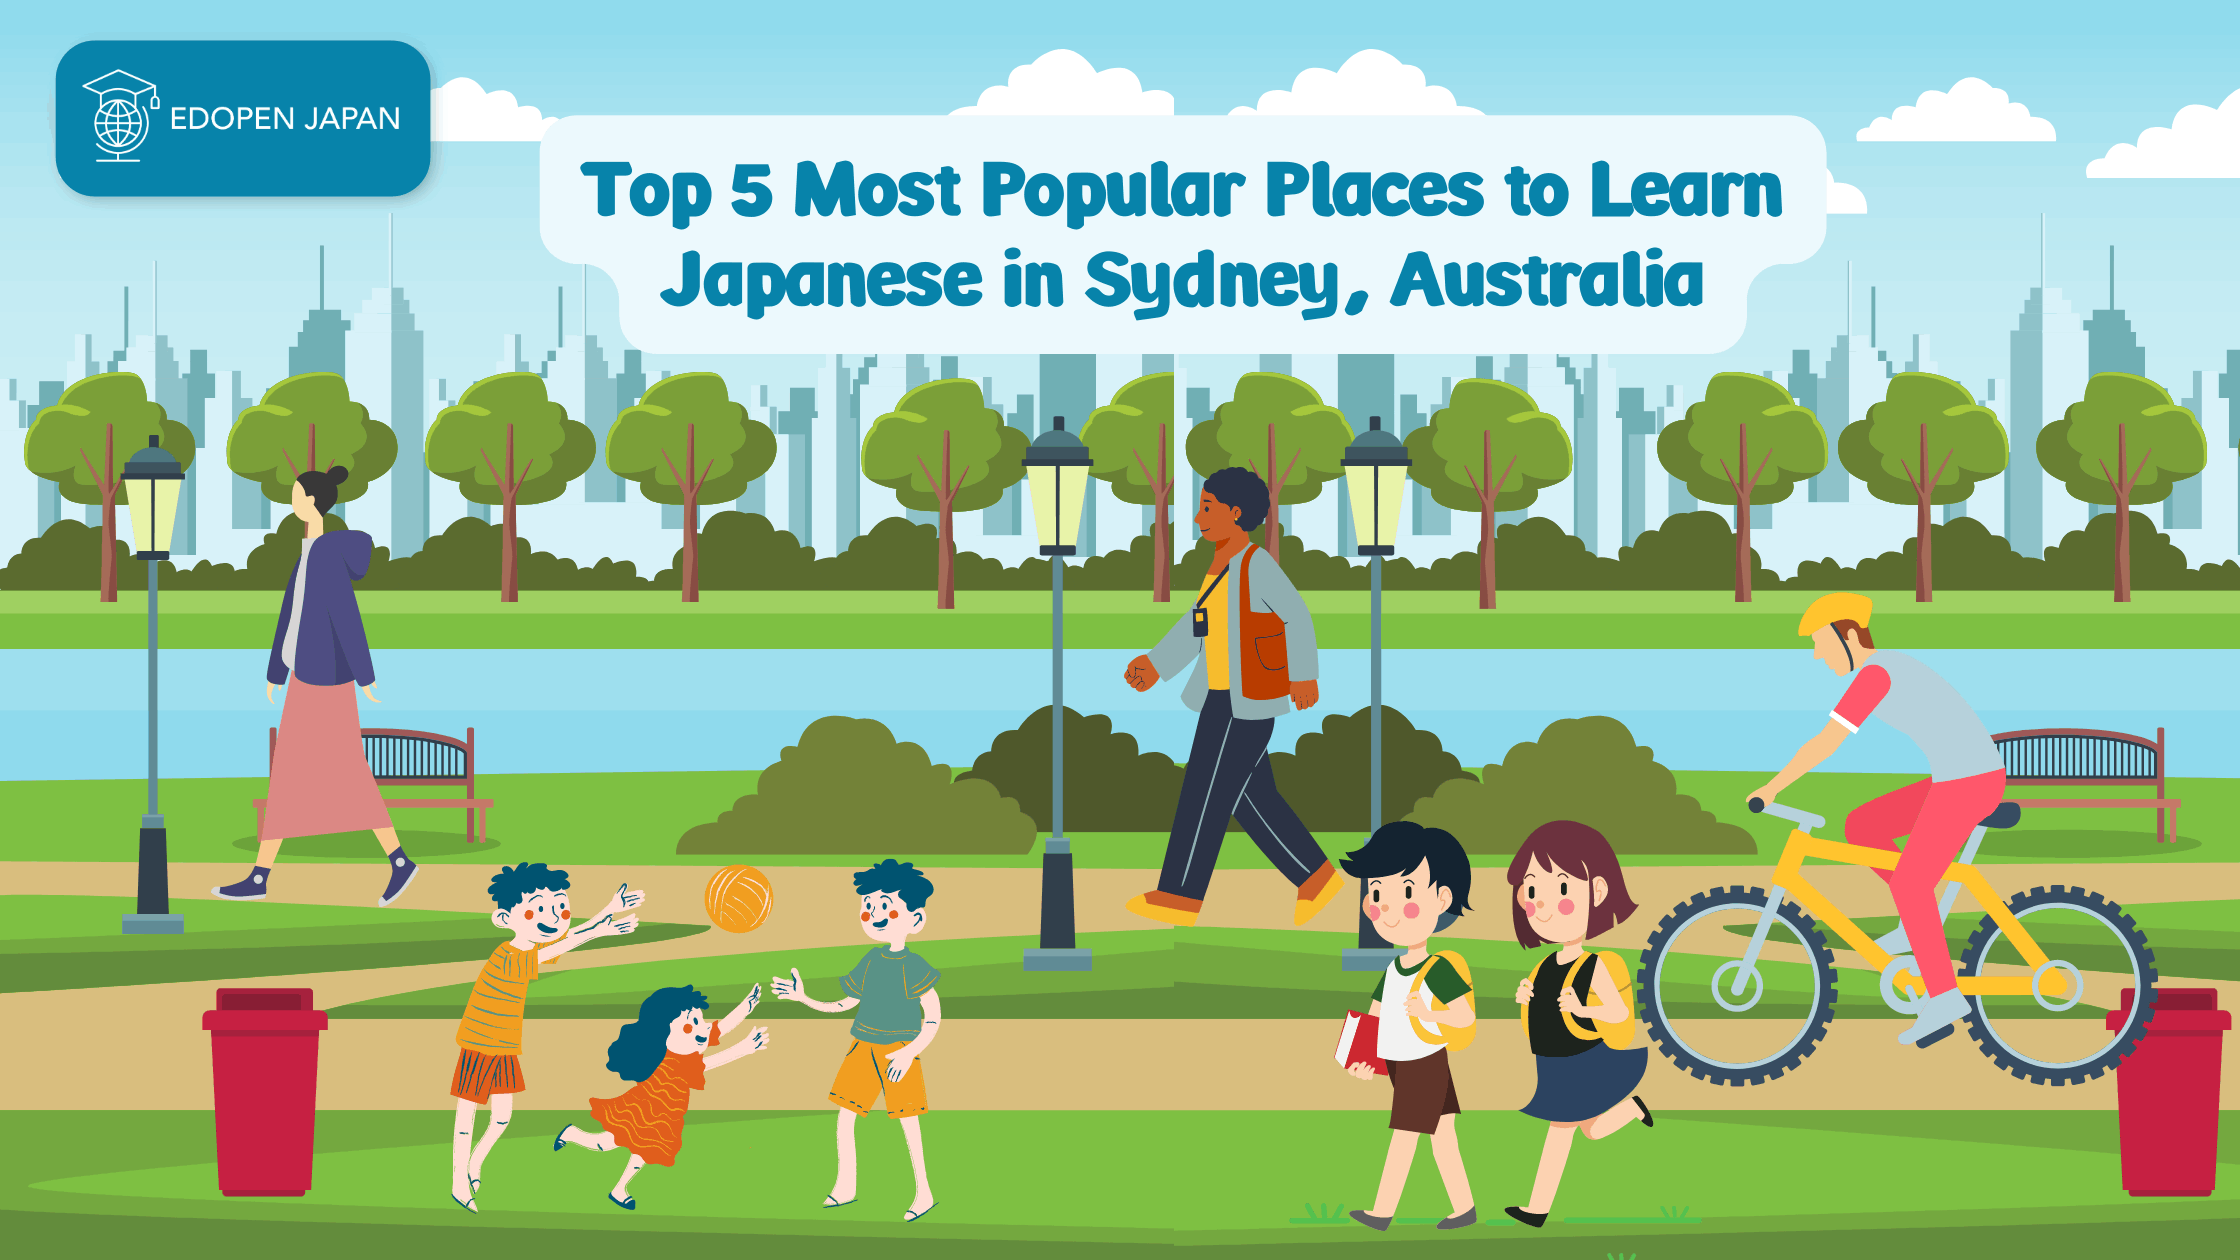 Top 5 Most Popular Places to Learn Japanese in Sydney, Australia